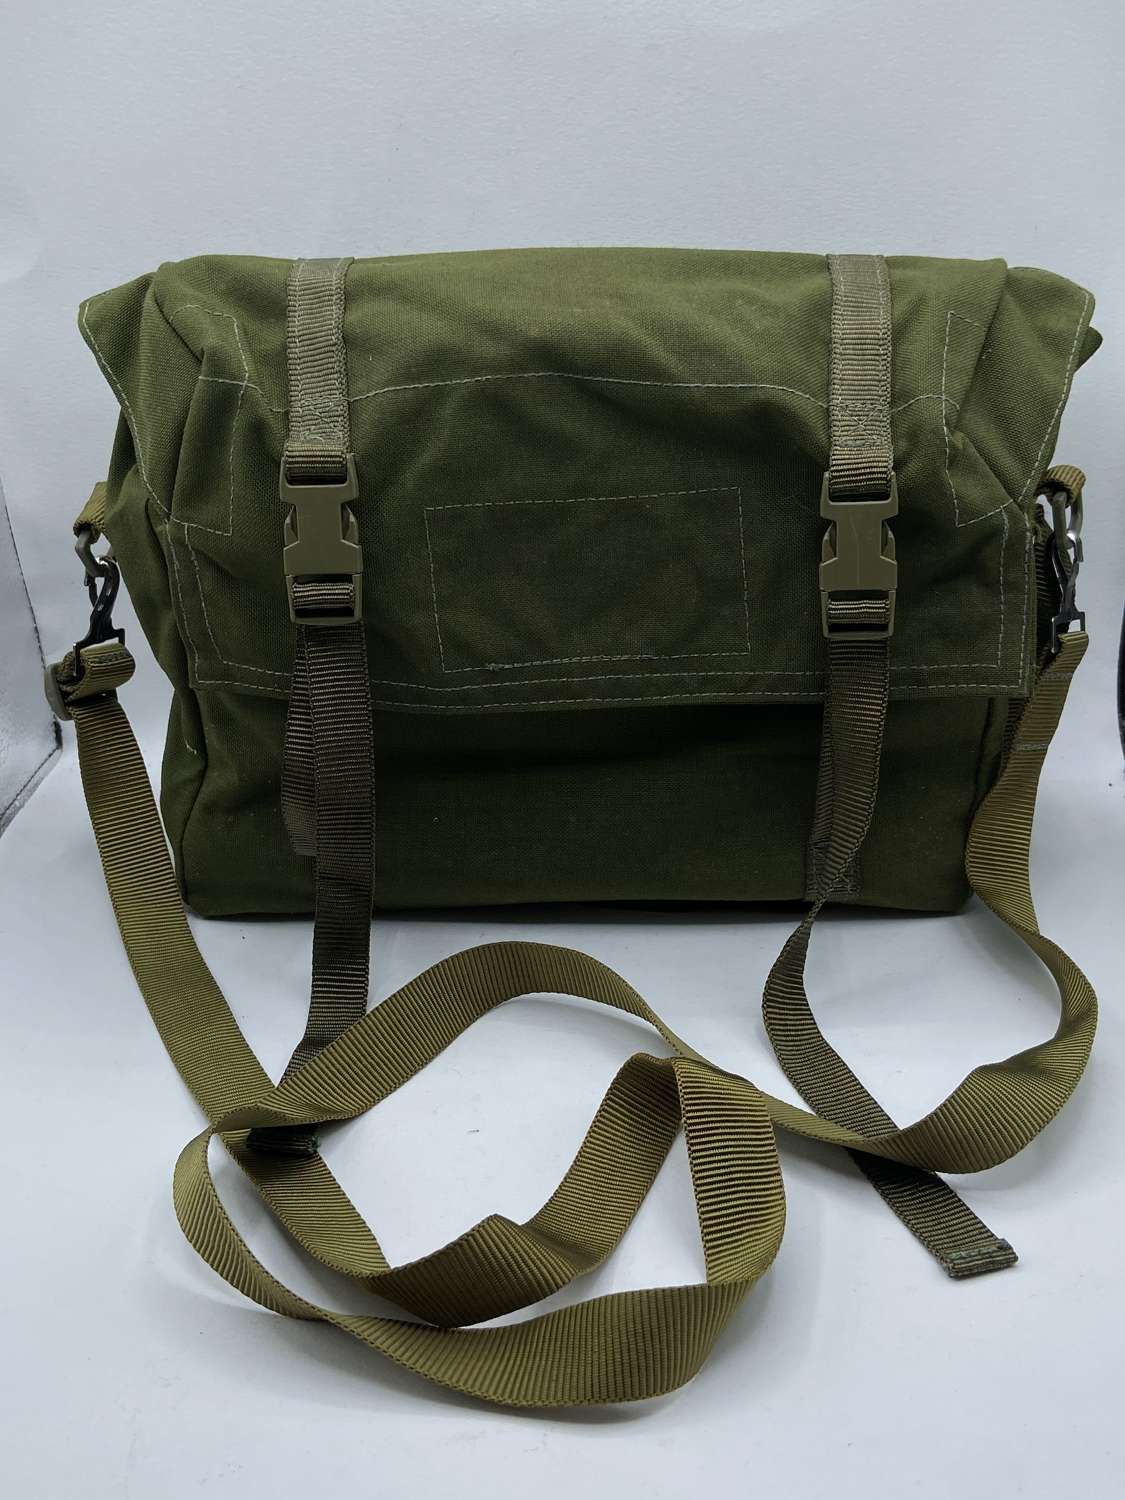 Modern Russian USSR Army Olive Nylon Shoulder Bag And Padded Strap